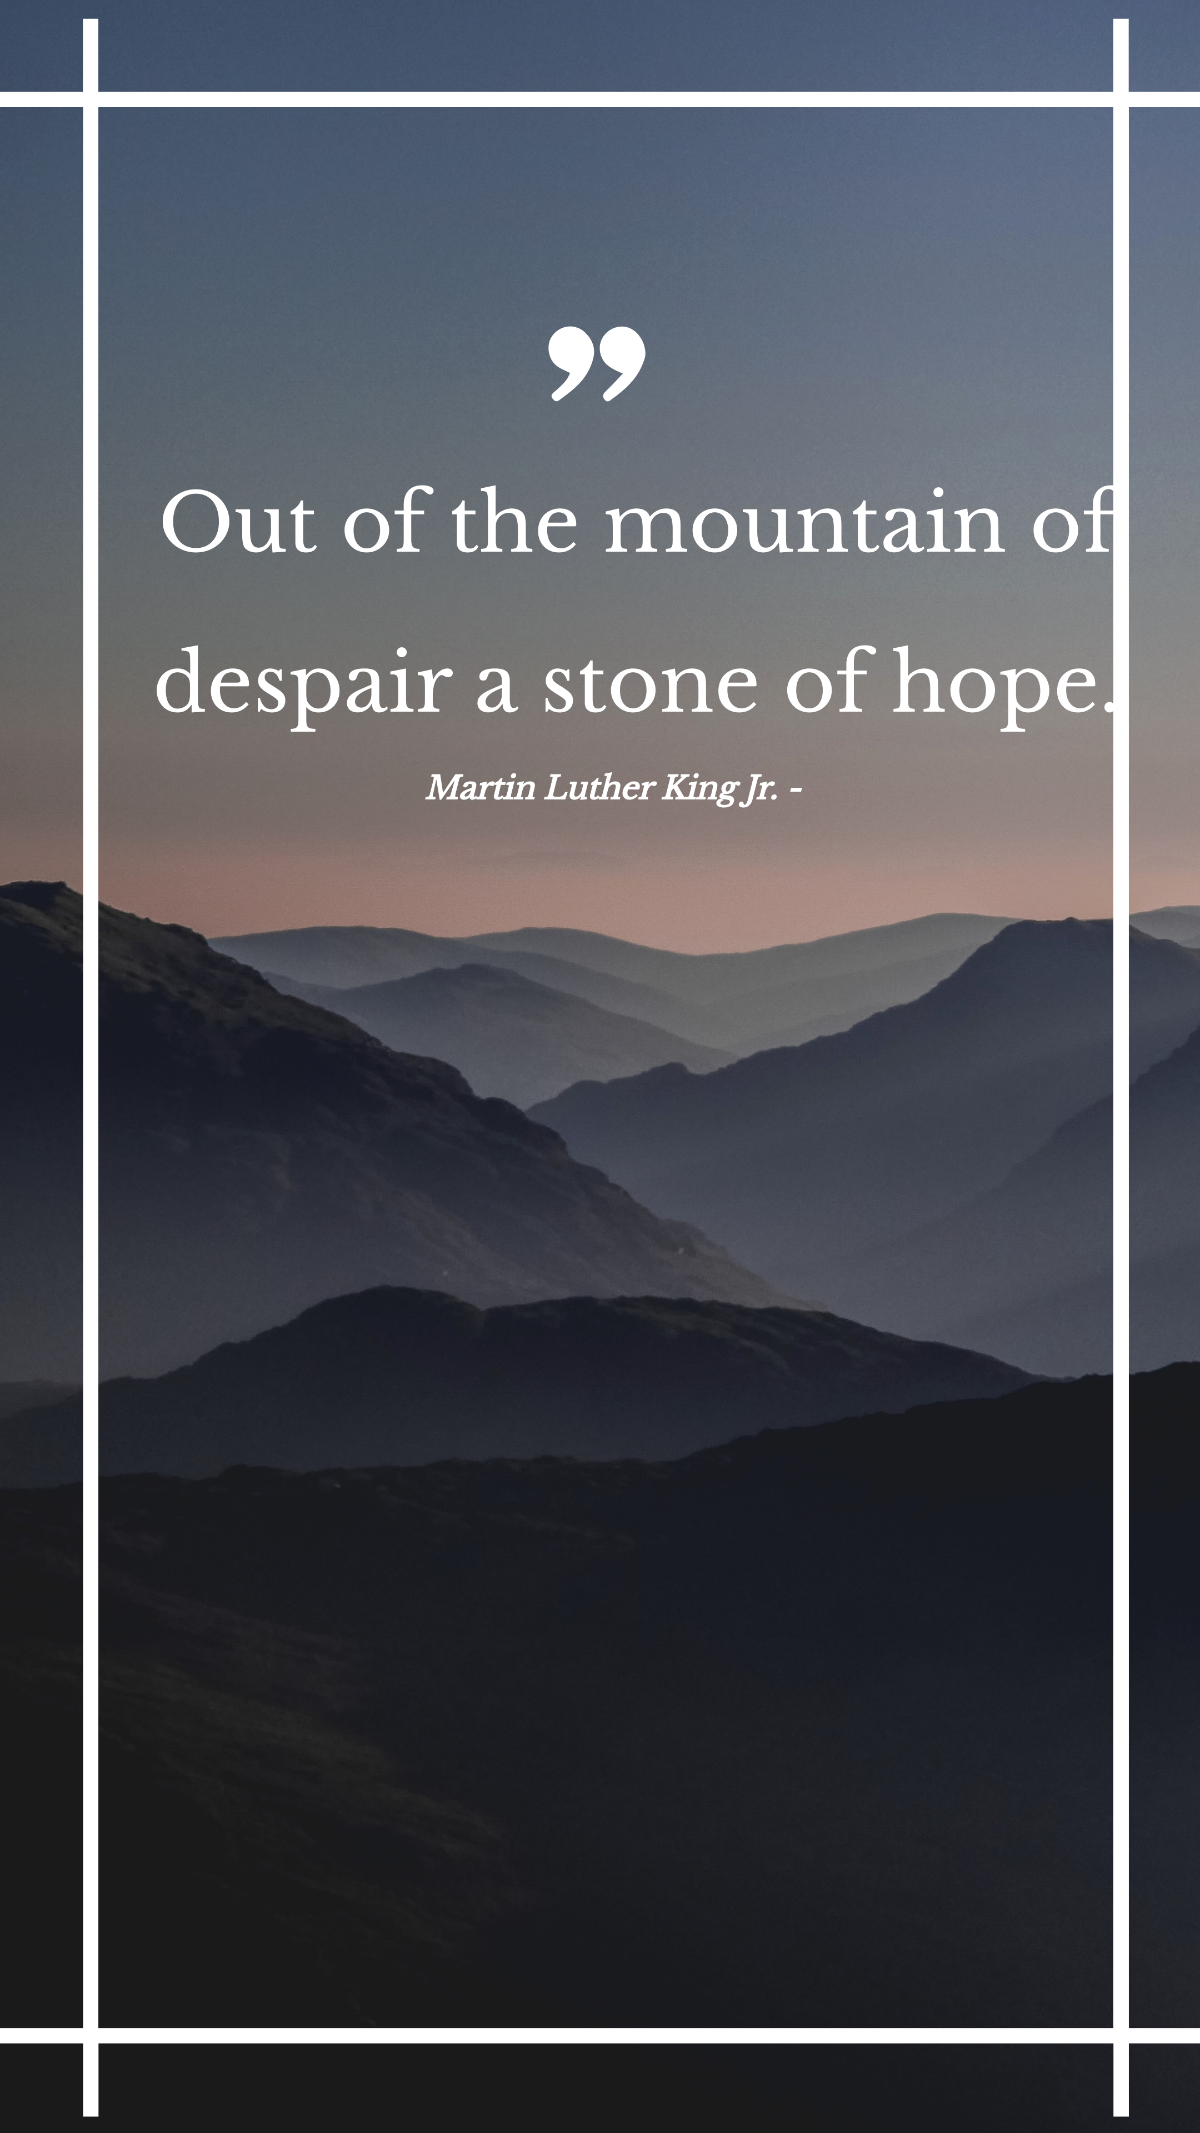 Martin Luther King Jr. - Out of the mountain of despair a stone of hope.